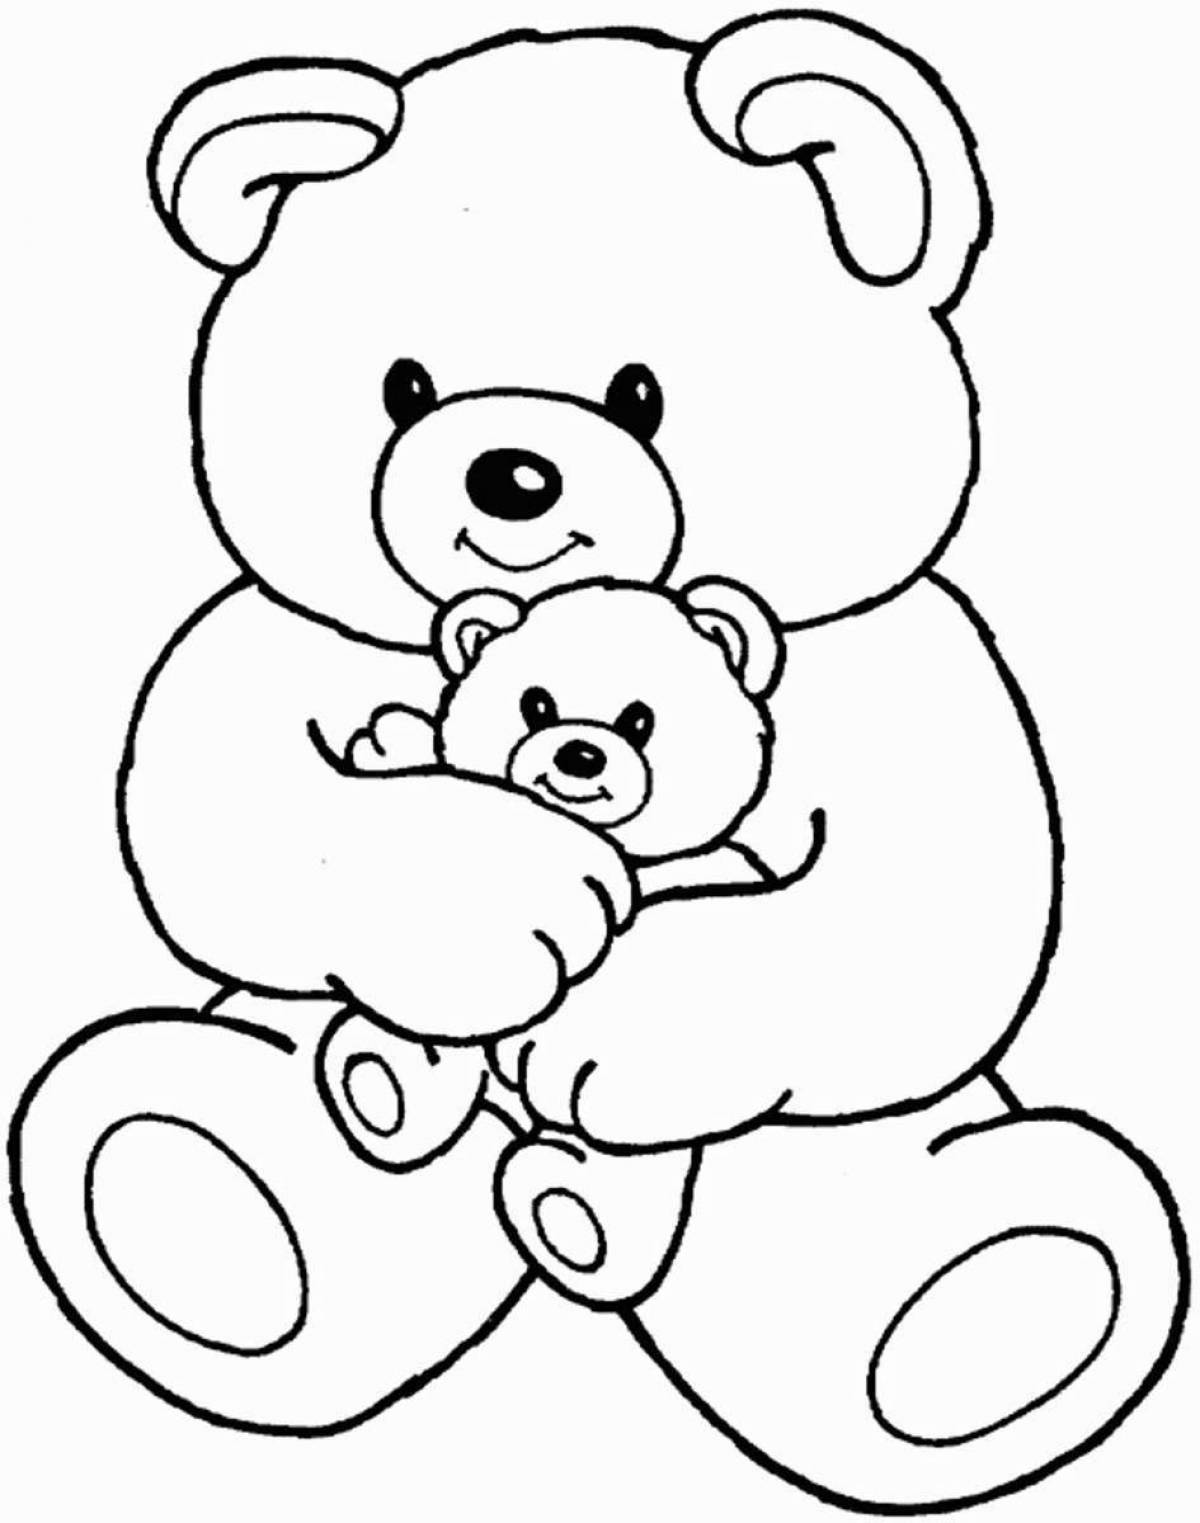 Cute teddy bear coloring book for 4-5 year olds